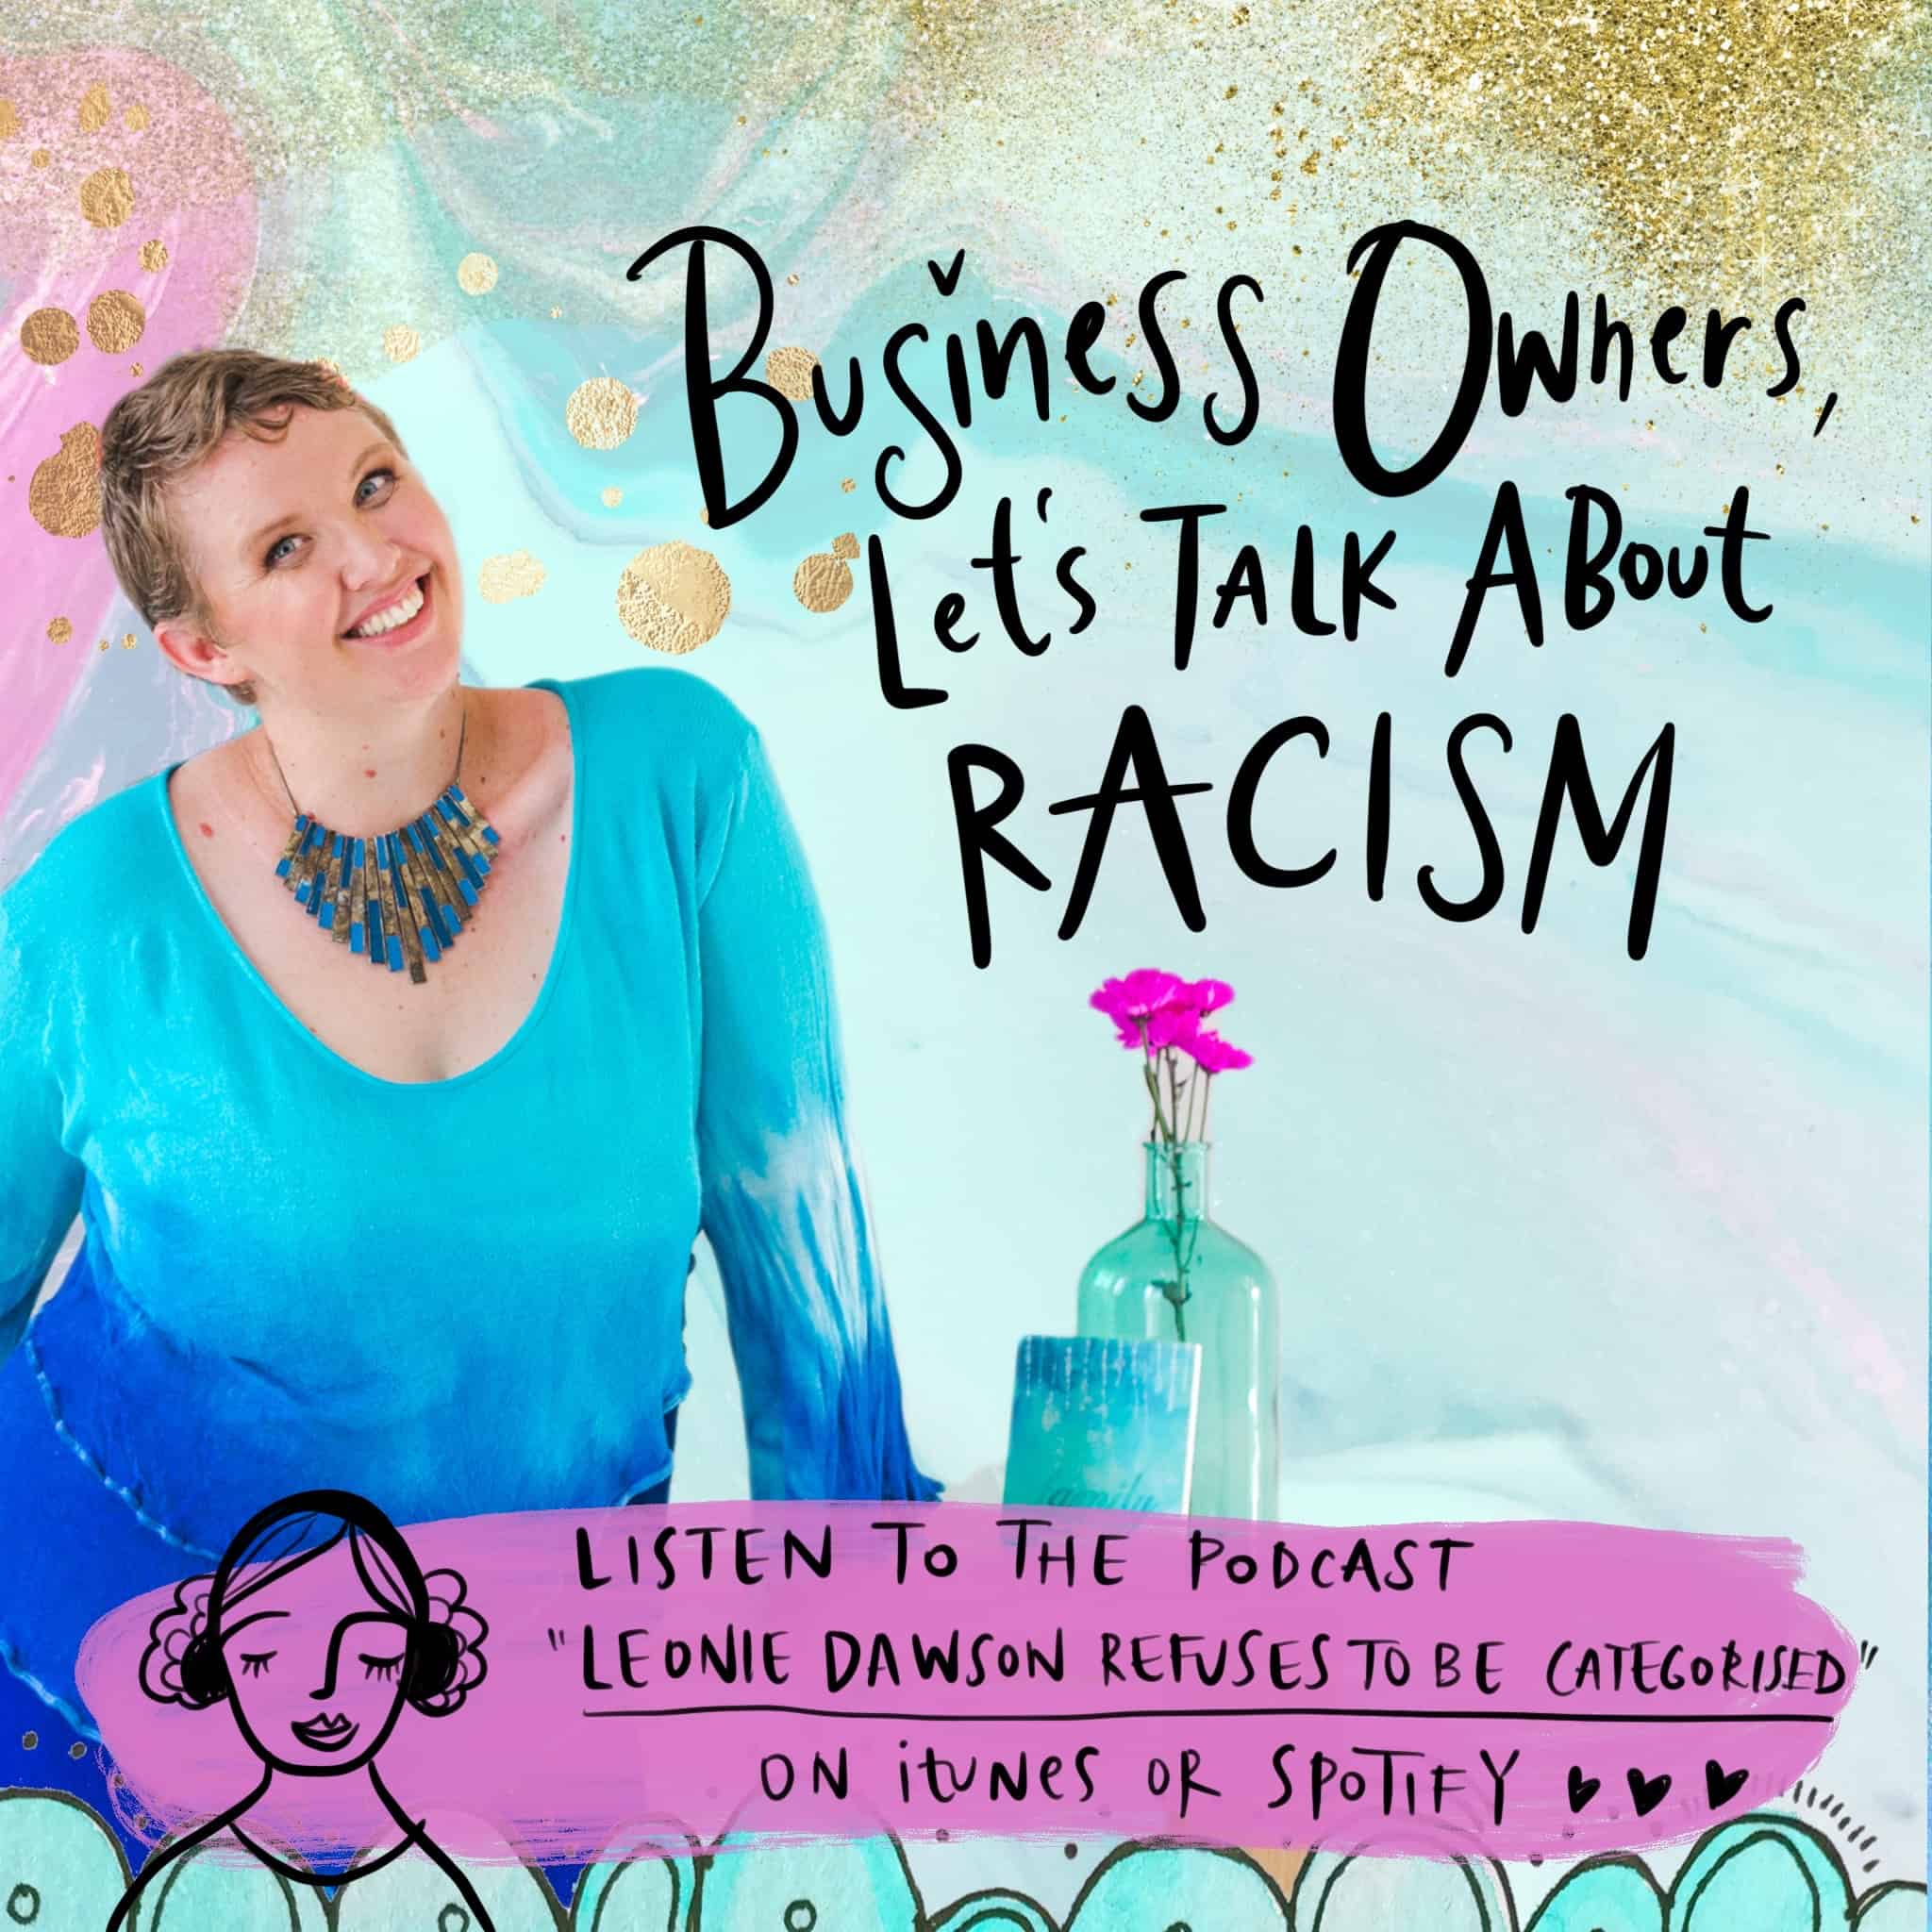 Podcast: Business Owners, Let's Talk About Racism